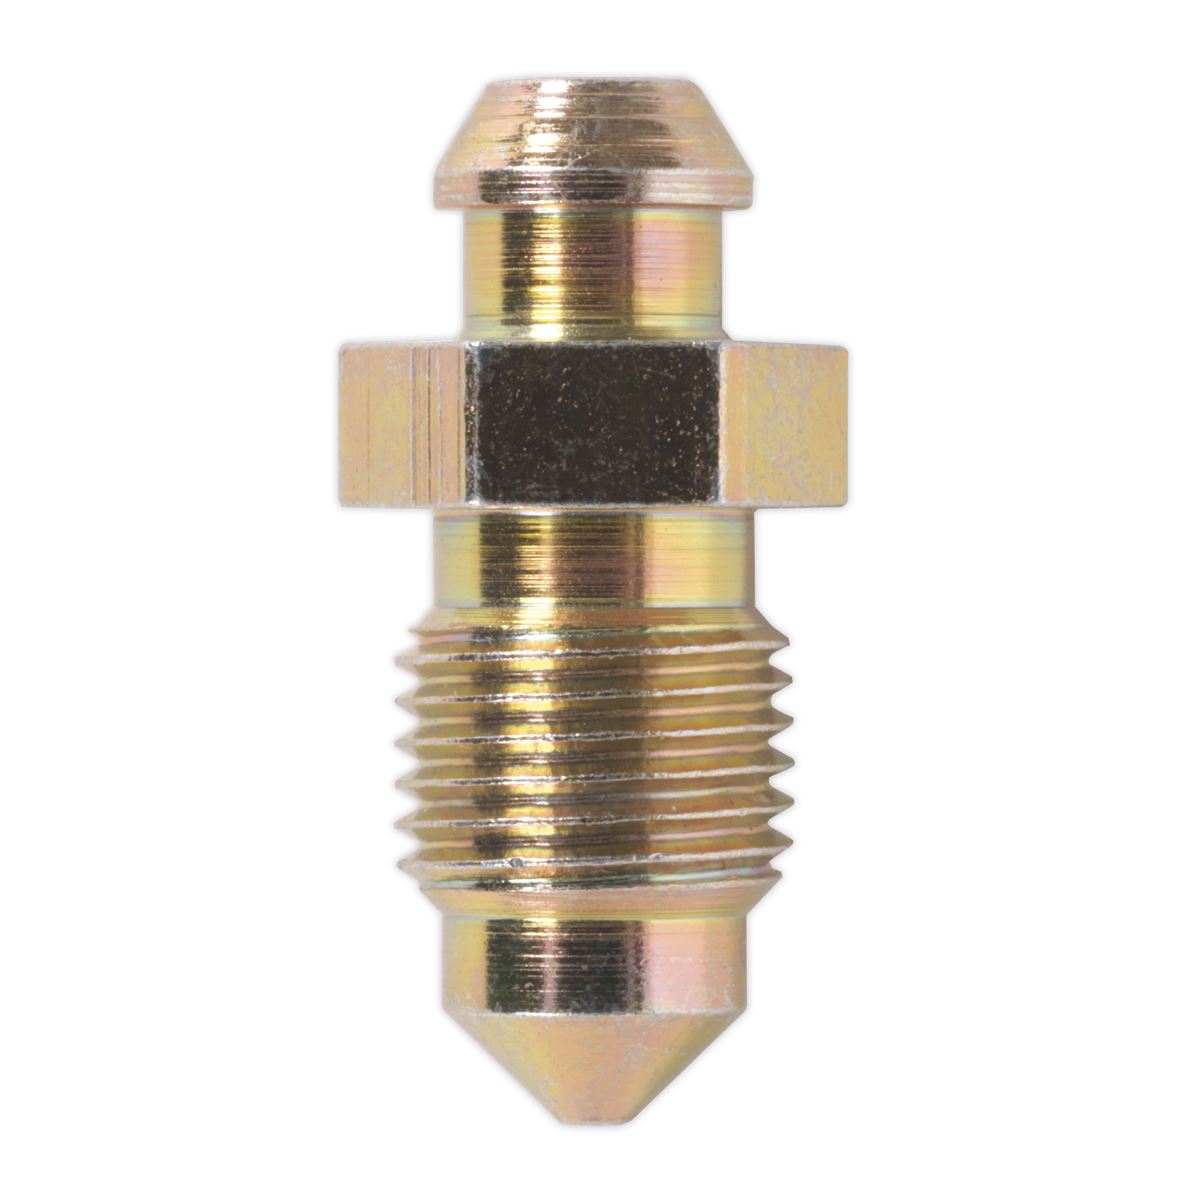 Sealey Brake Bleed Screw M10 x 25mm 1mm Pitch Pack of 10